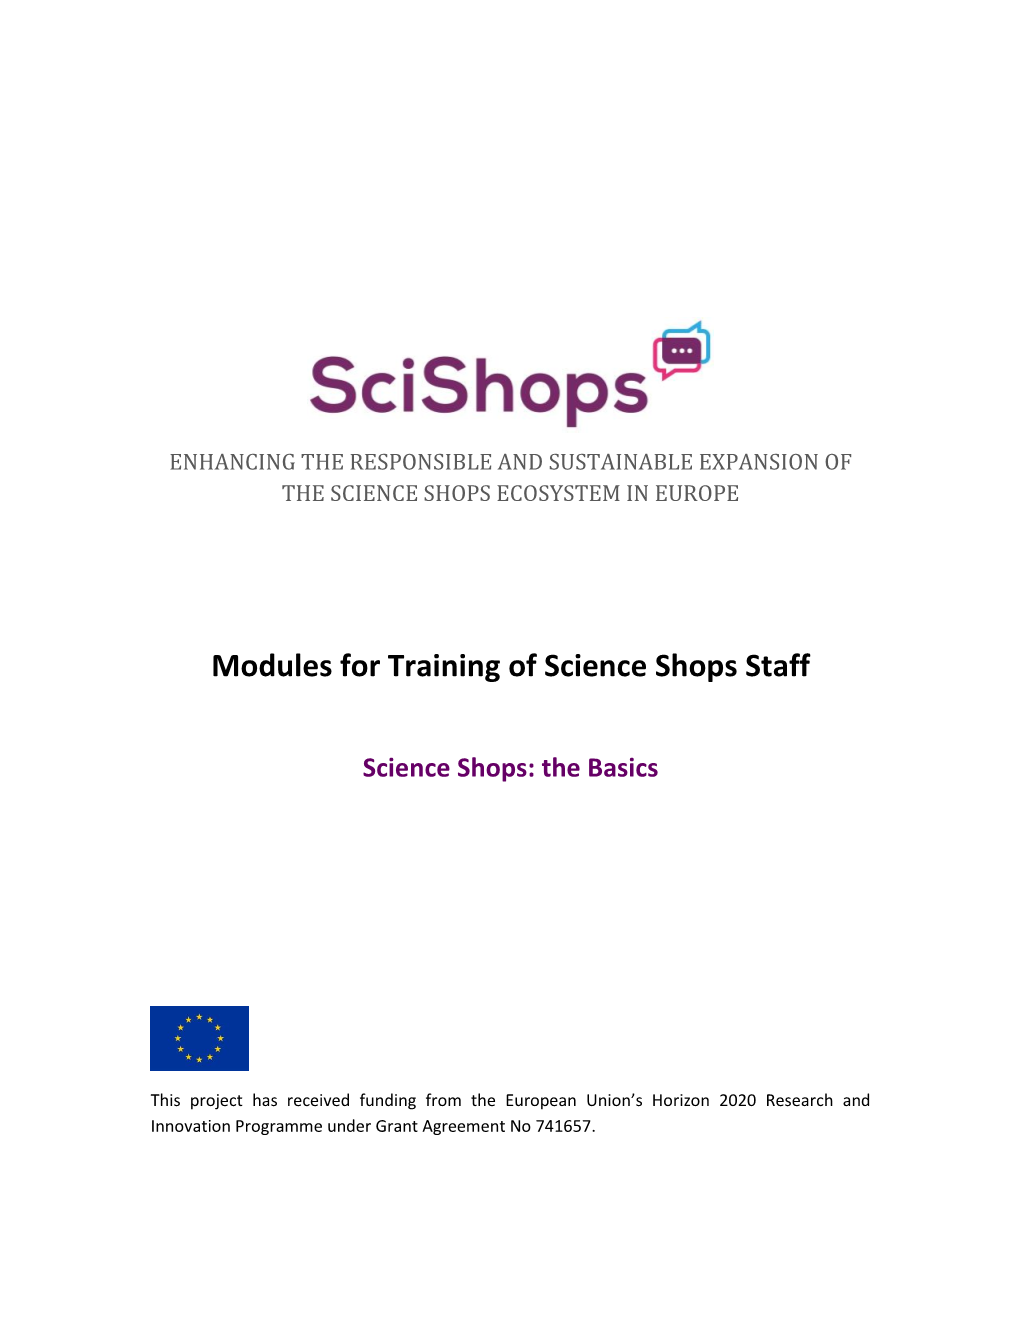 Modules for Training of Science Shops Staff